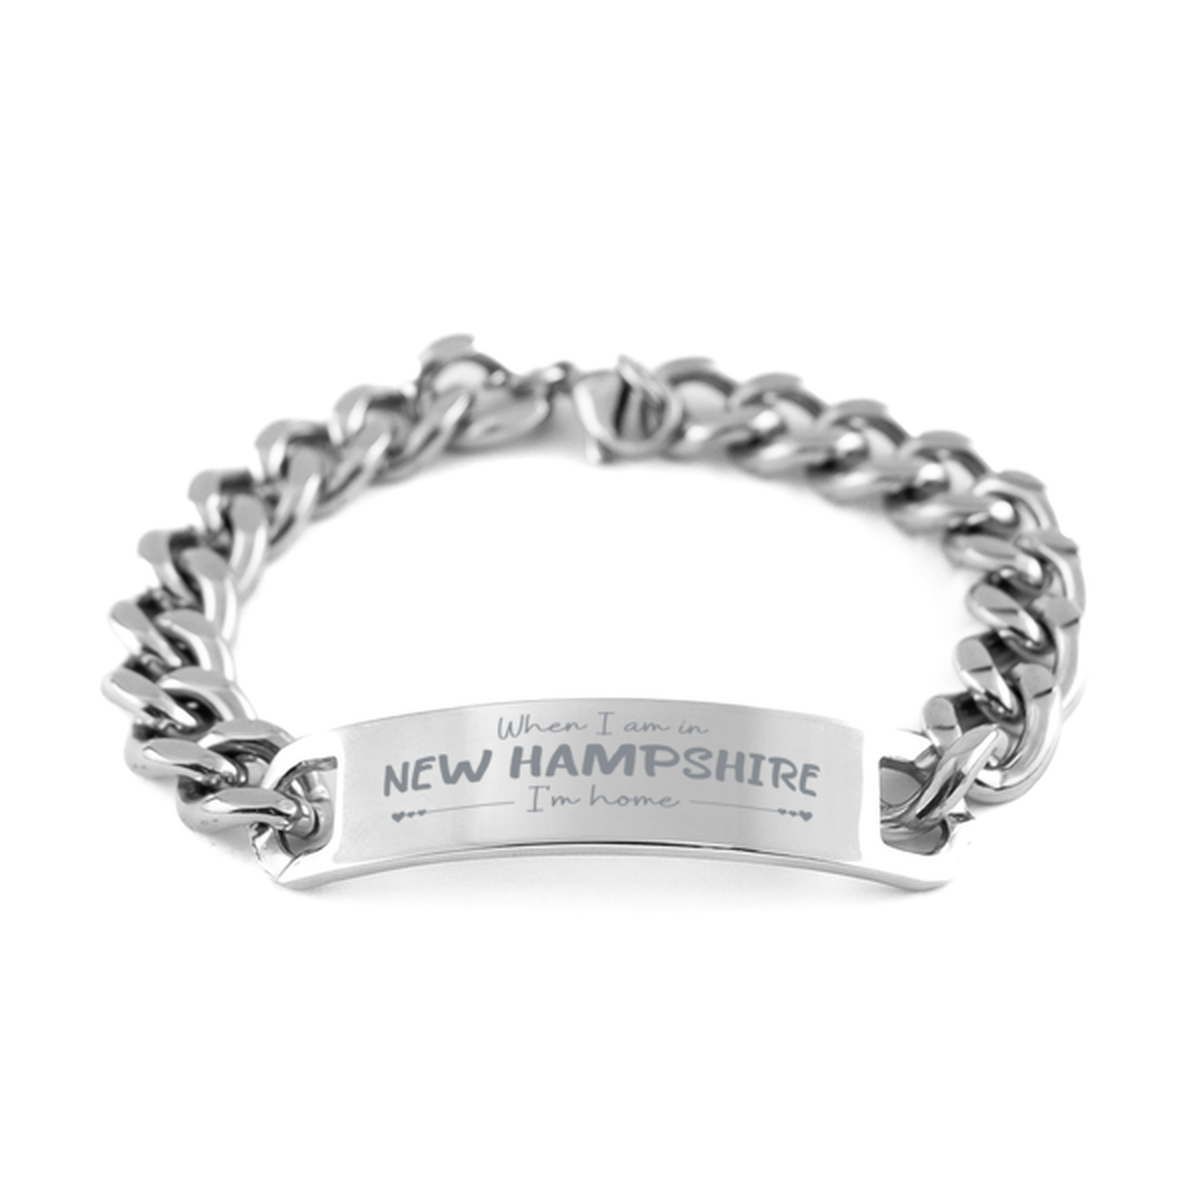 When I am in New Hampshire I'm home Cuban Chain Stainless Steel Bracelet, Cheap Gifts For New Hampshire, State New Hampshire Birthday Gifts for Friends Coworker